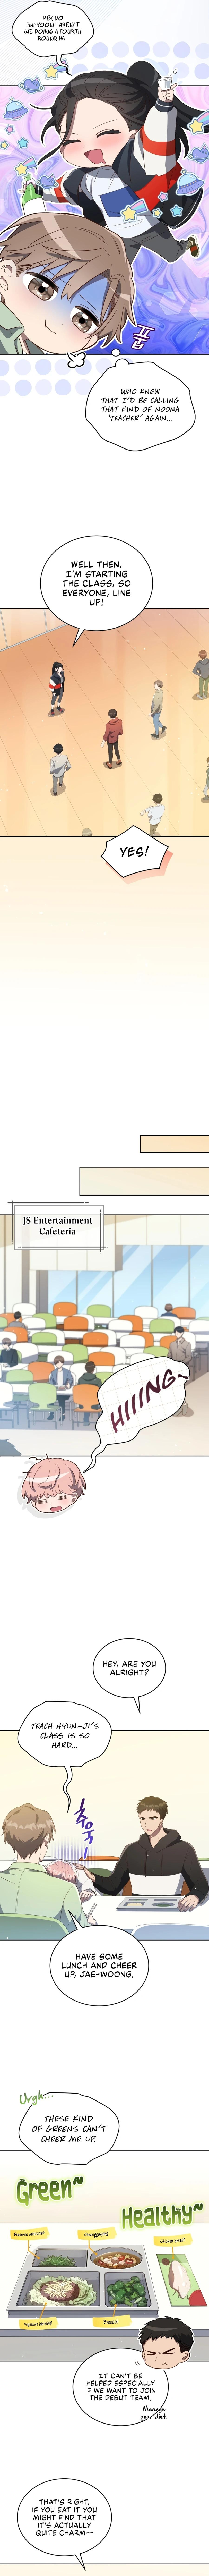 The Second Life of an All-Rounder Idol chapter 5